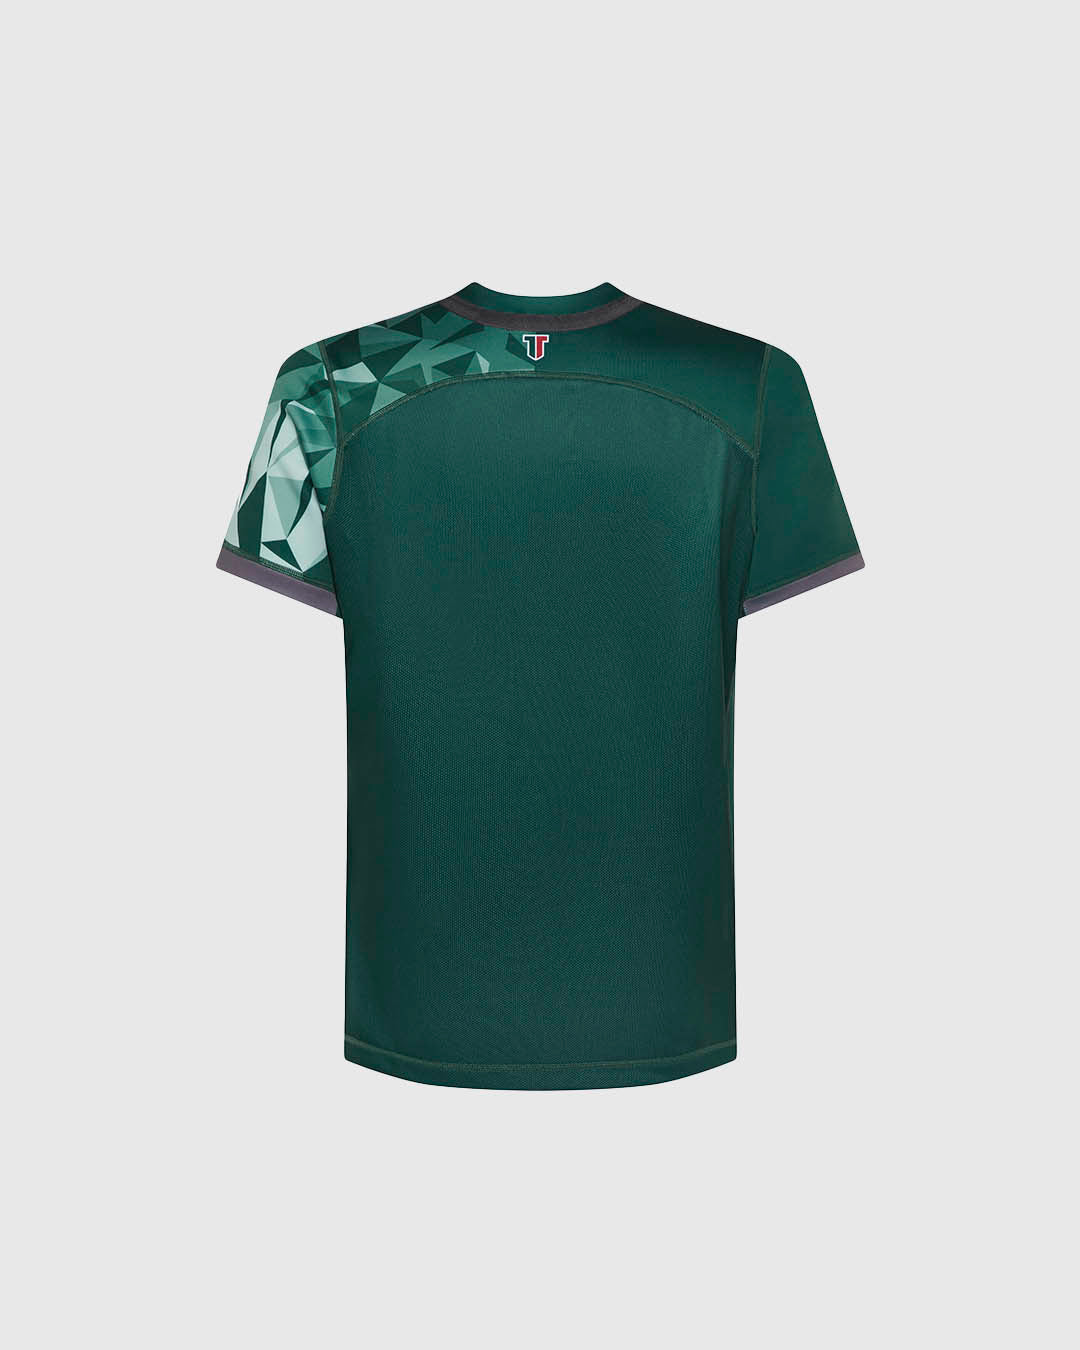 Leicester Tigers - Replica Rugby Jersey